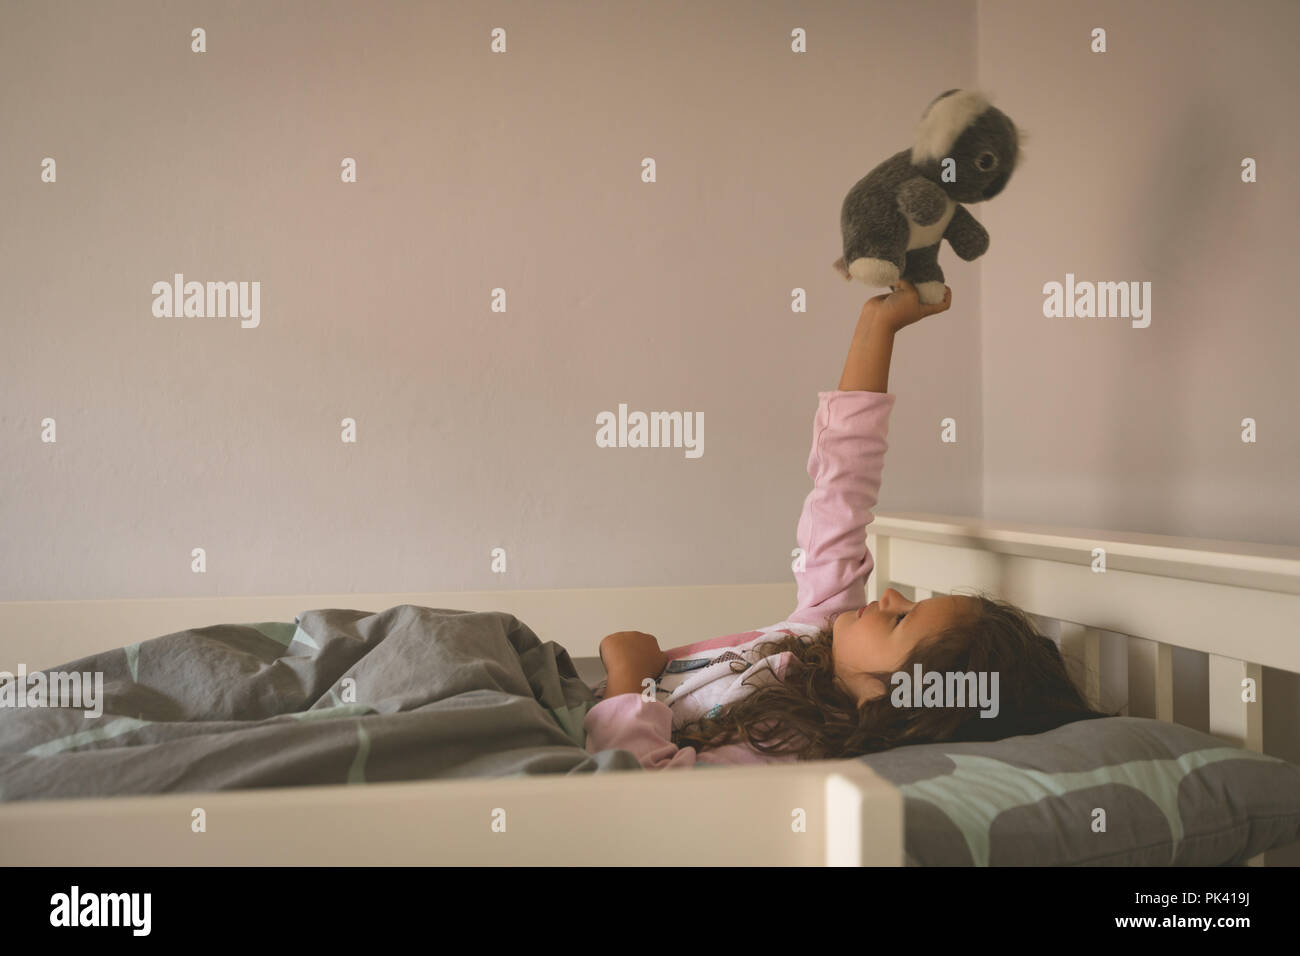 Girl Playing with teddy bear on bed Banque D'Images